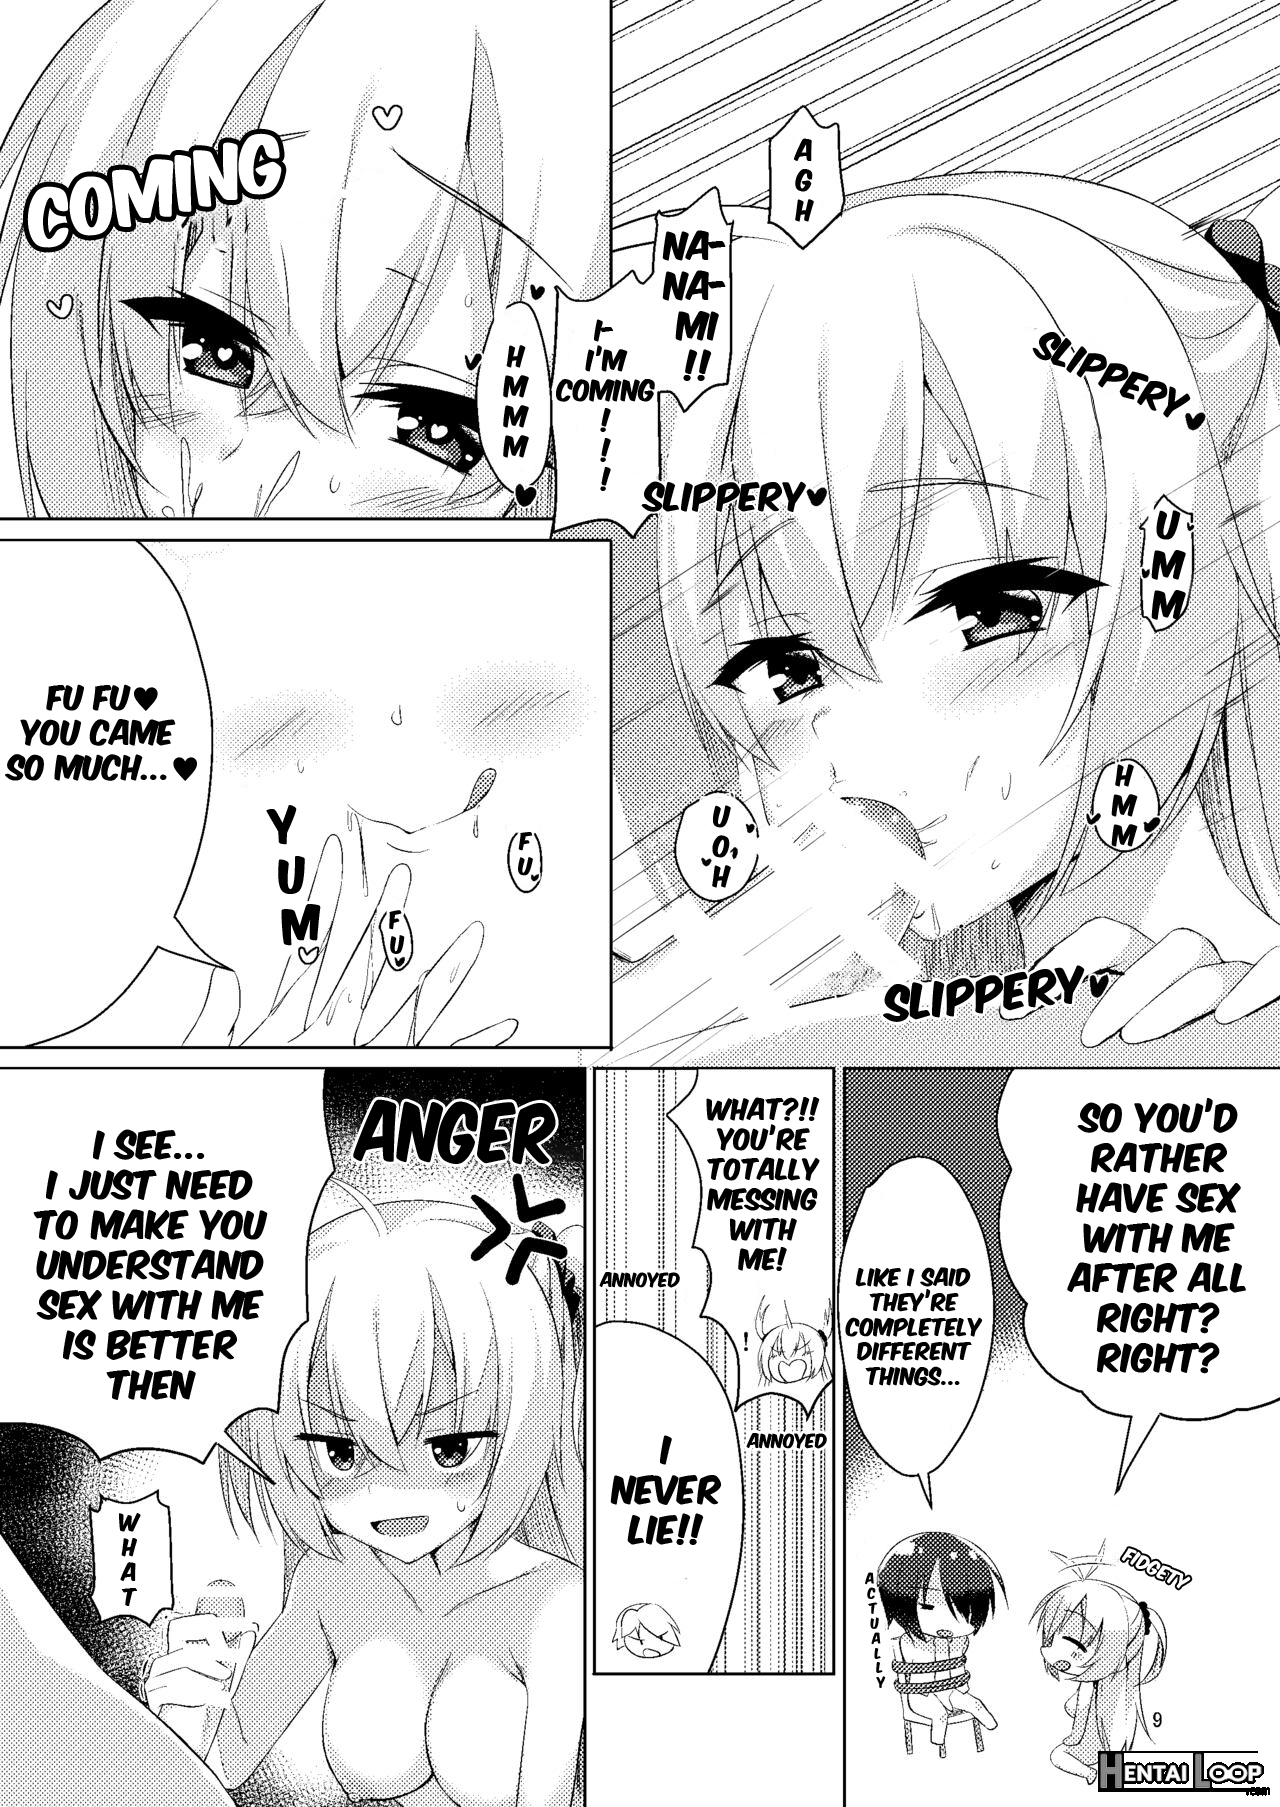 There's No Way I Would Lose To Onii-chan, Right? page 9